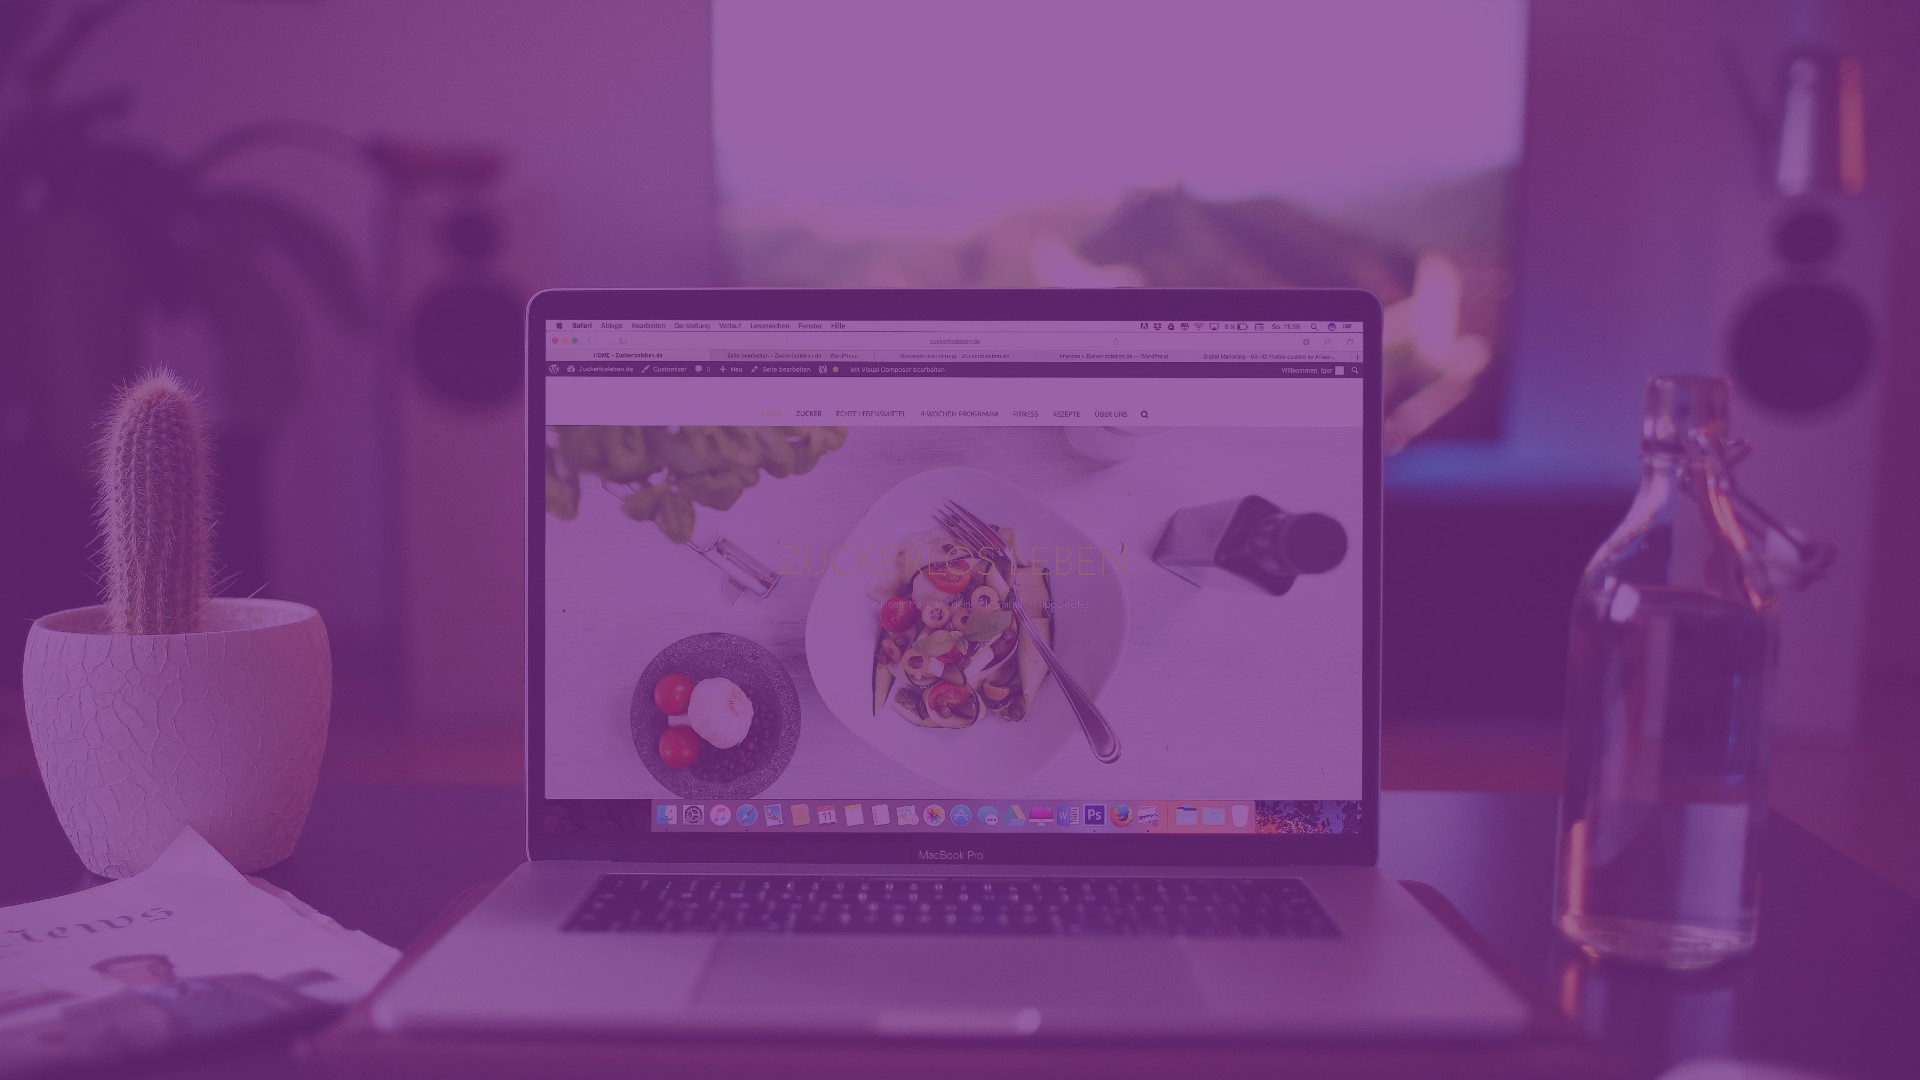 Macbook on a table with website showing colourful salad